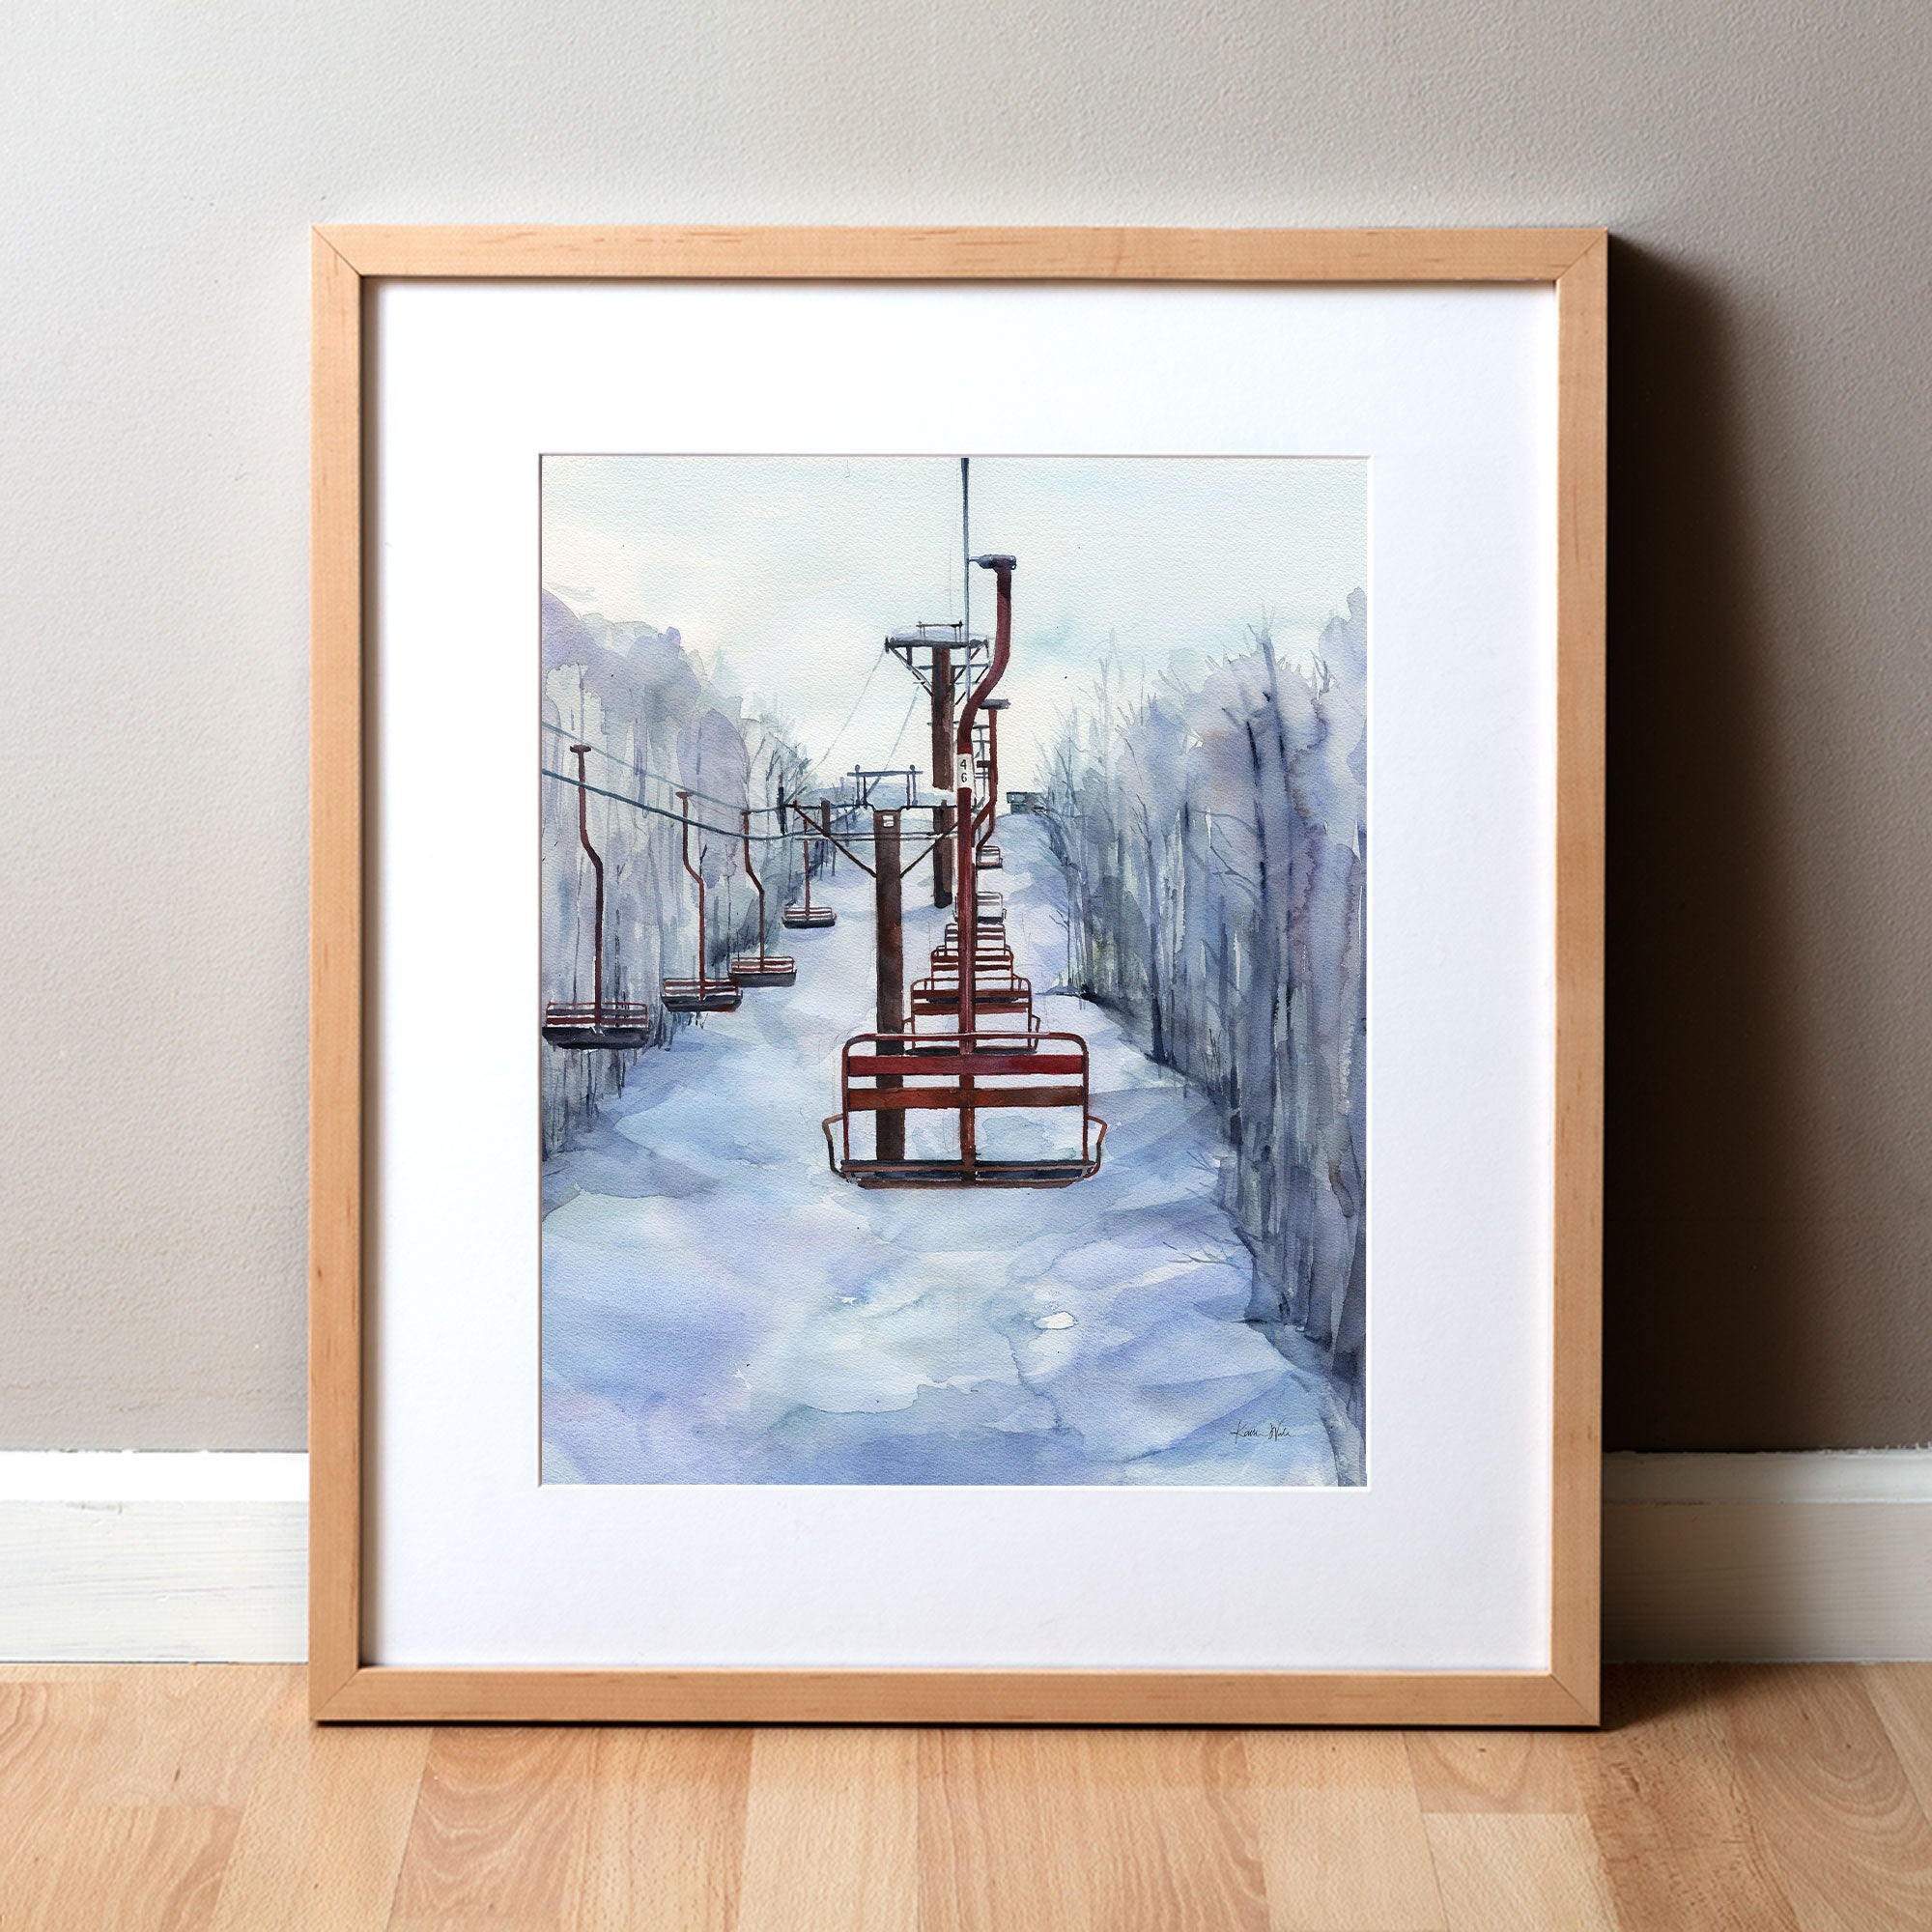 Framed watercolor painting of chairlifts in a snowy scene.